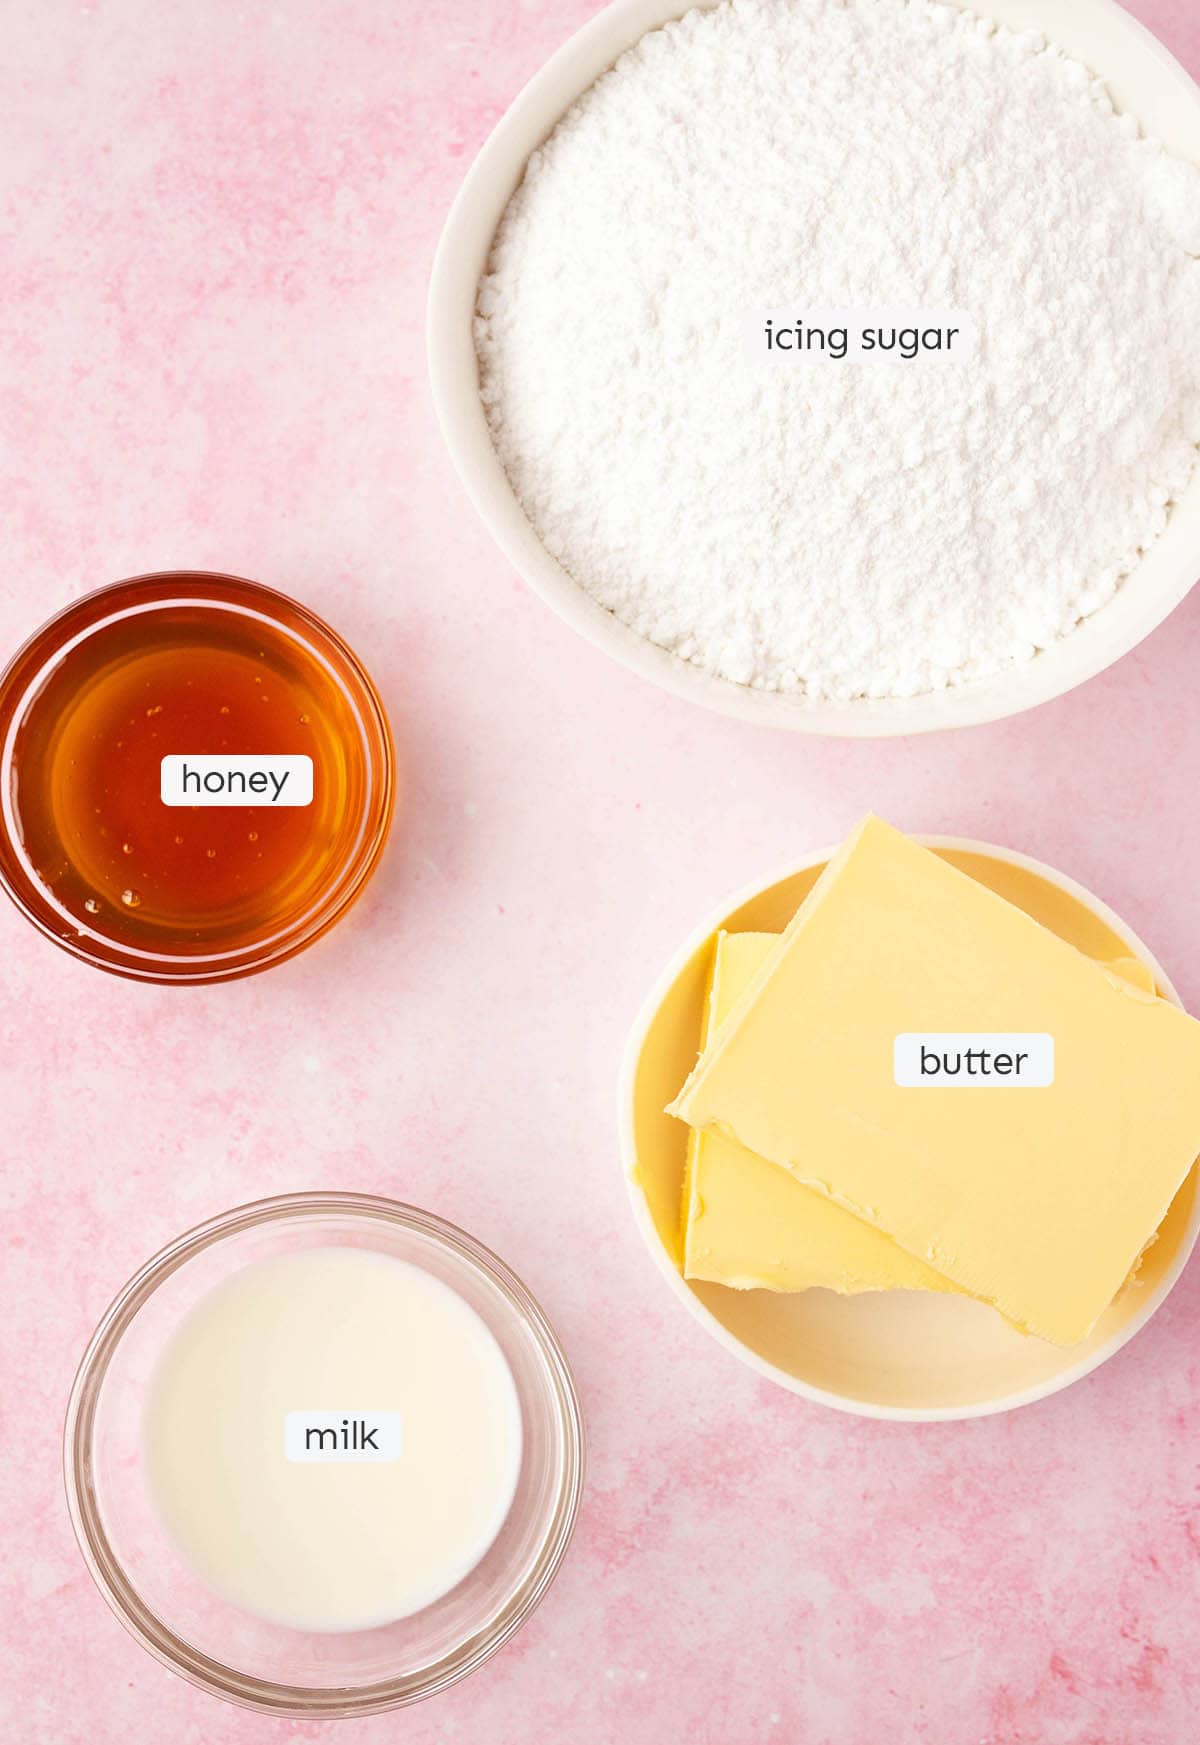 All the ingredients needed to make honey buttercream from scratch laid out on a pink backdrop.